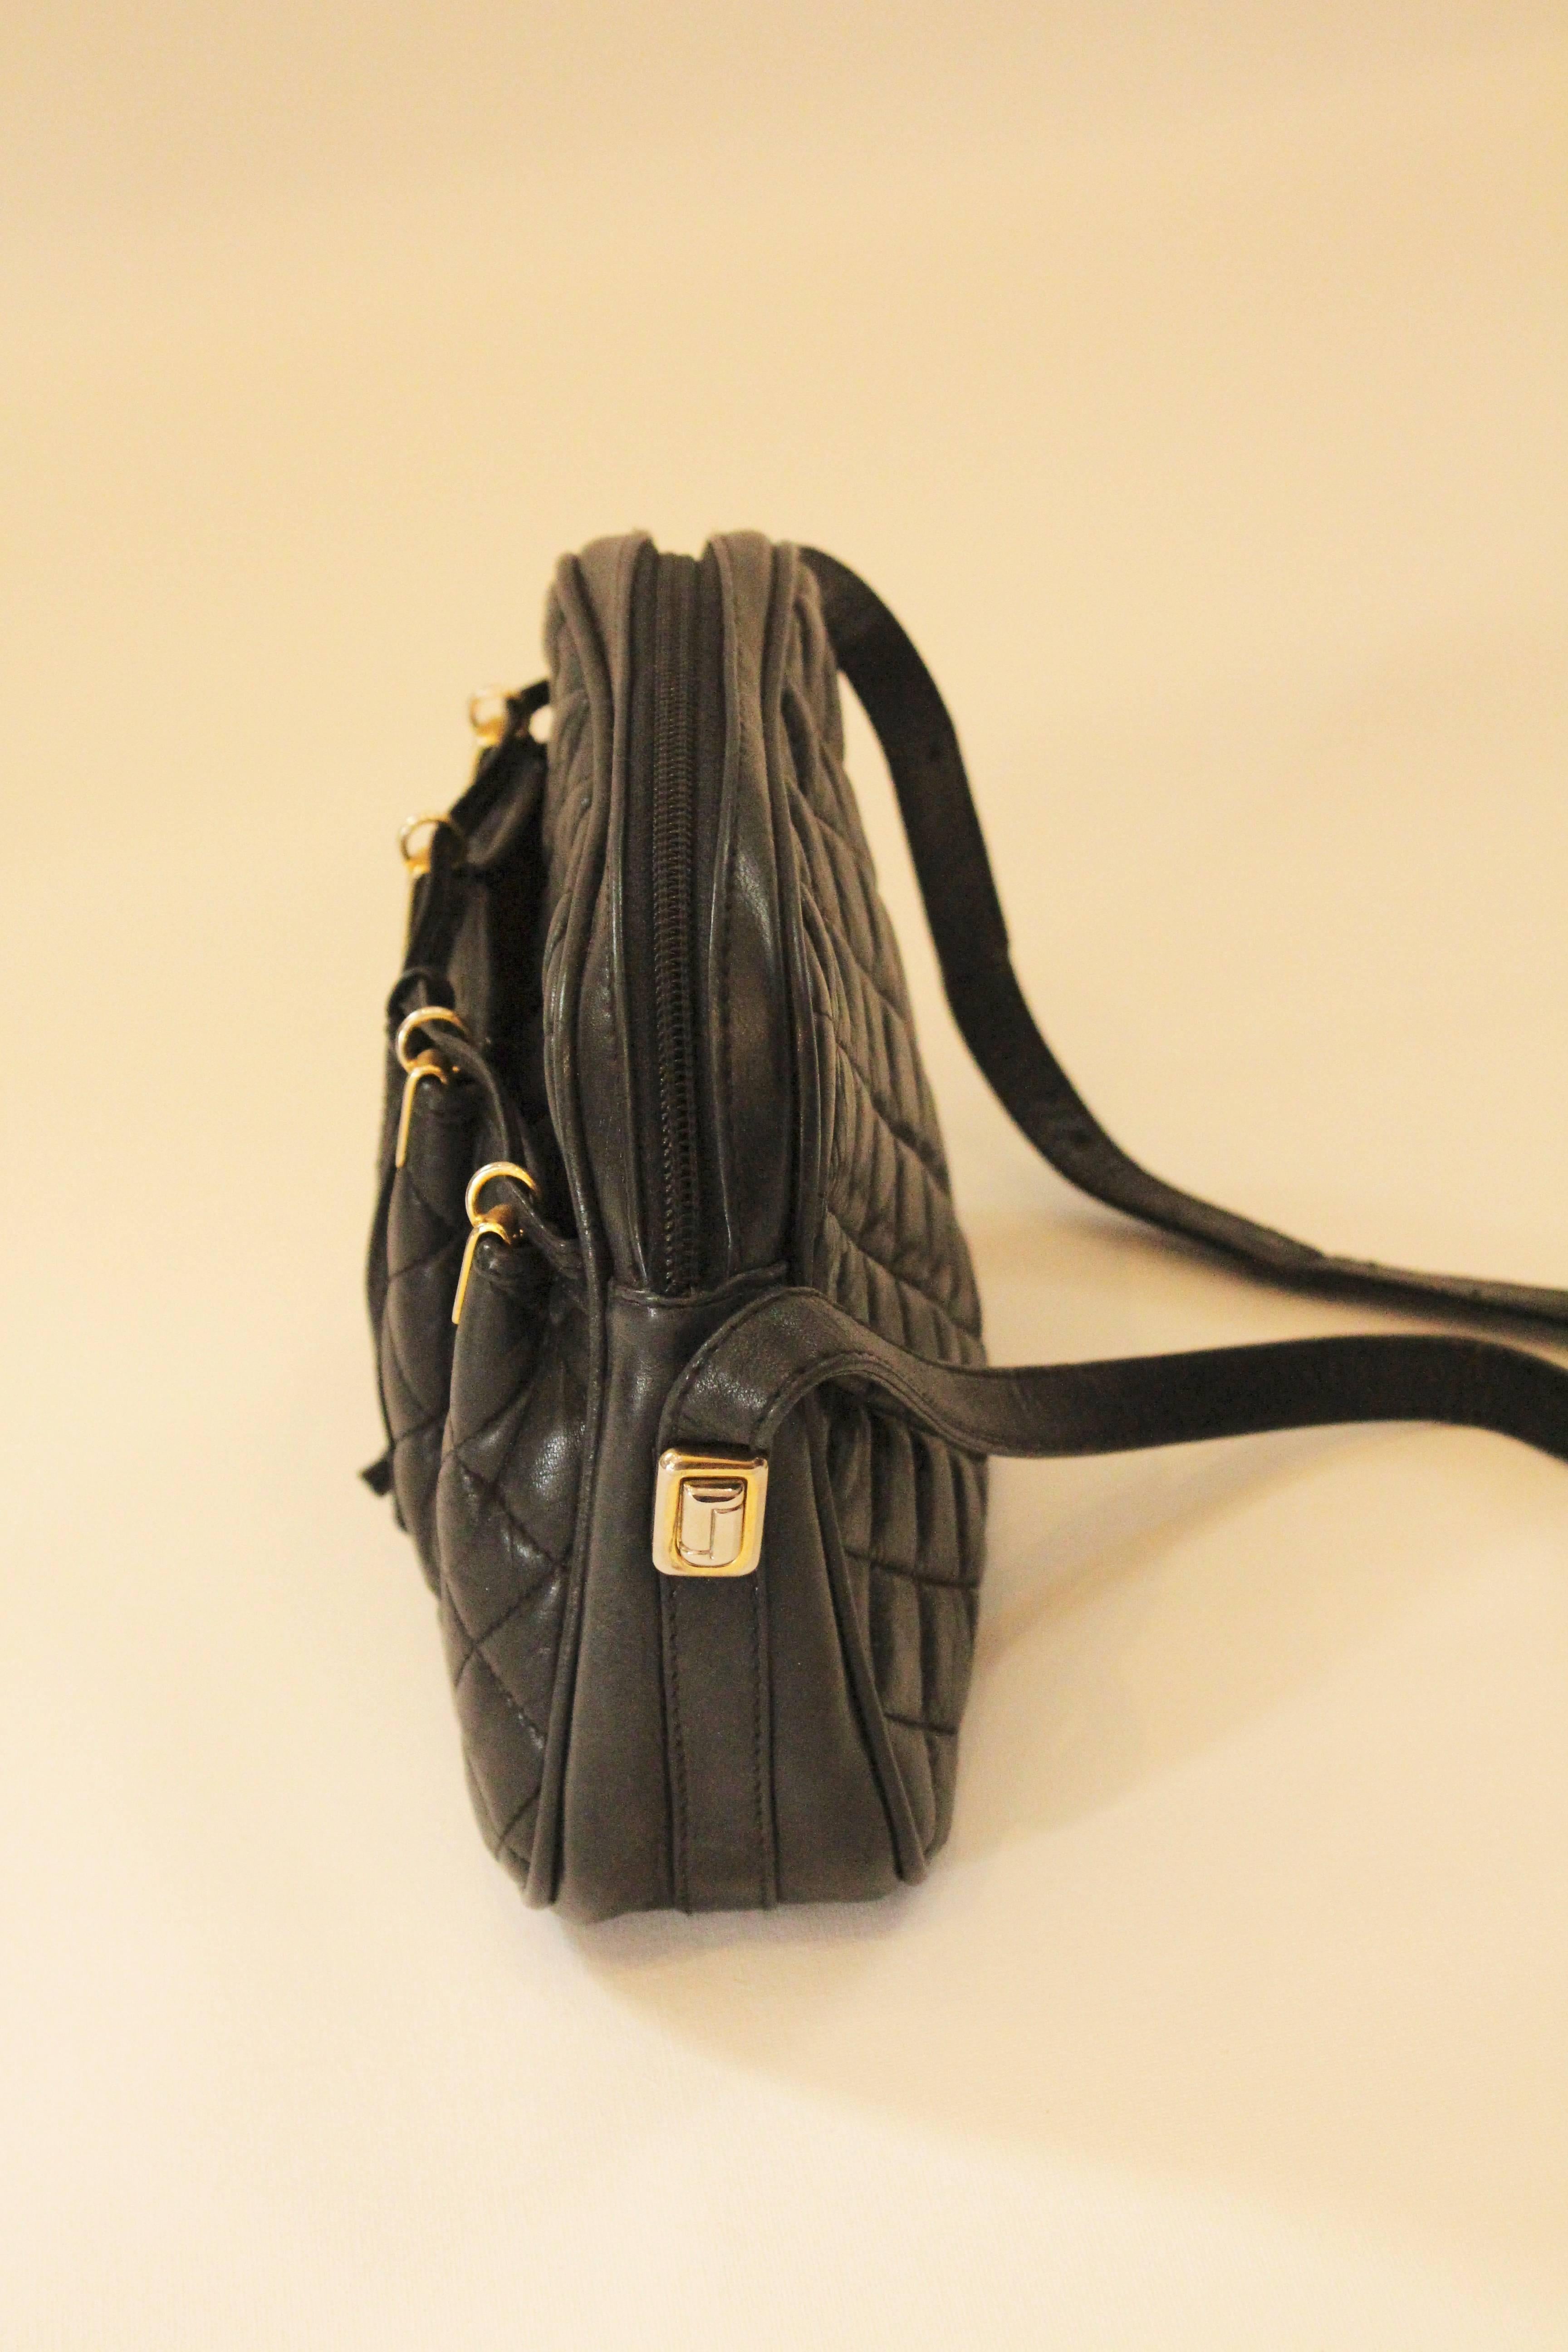 Vintage Judith Leiber Crossbody Bag  In Good Condition For Sale In Houston, TX